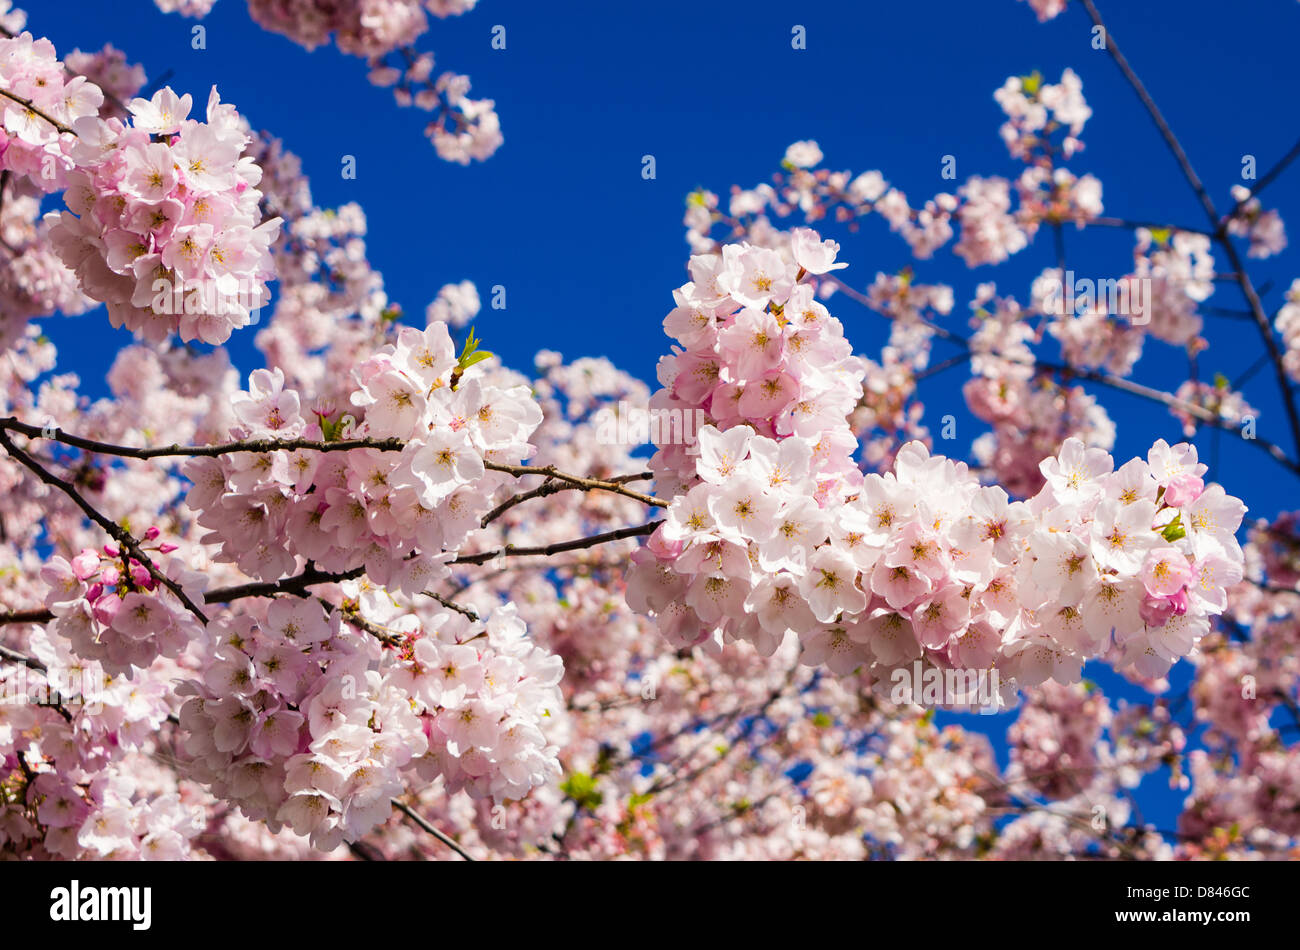 Pink flowering cherry trees with deep blue sky Stock Photo